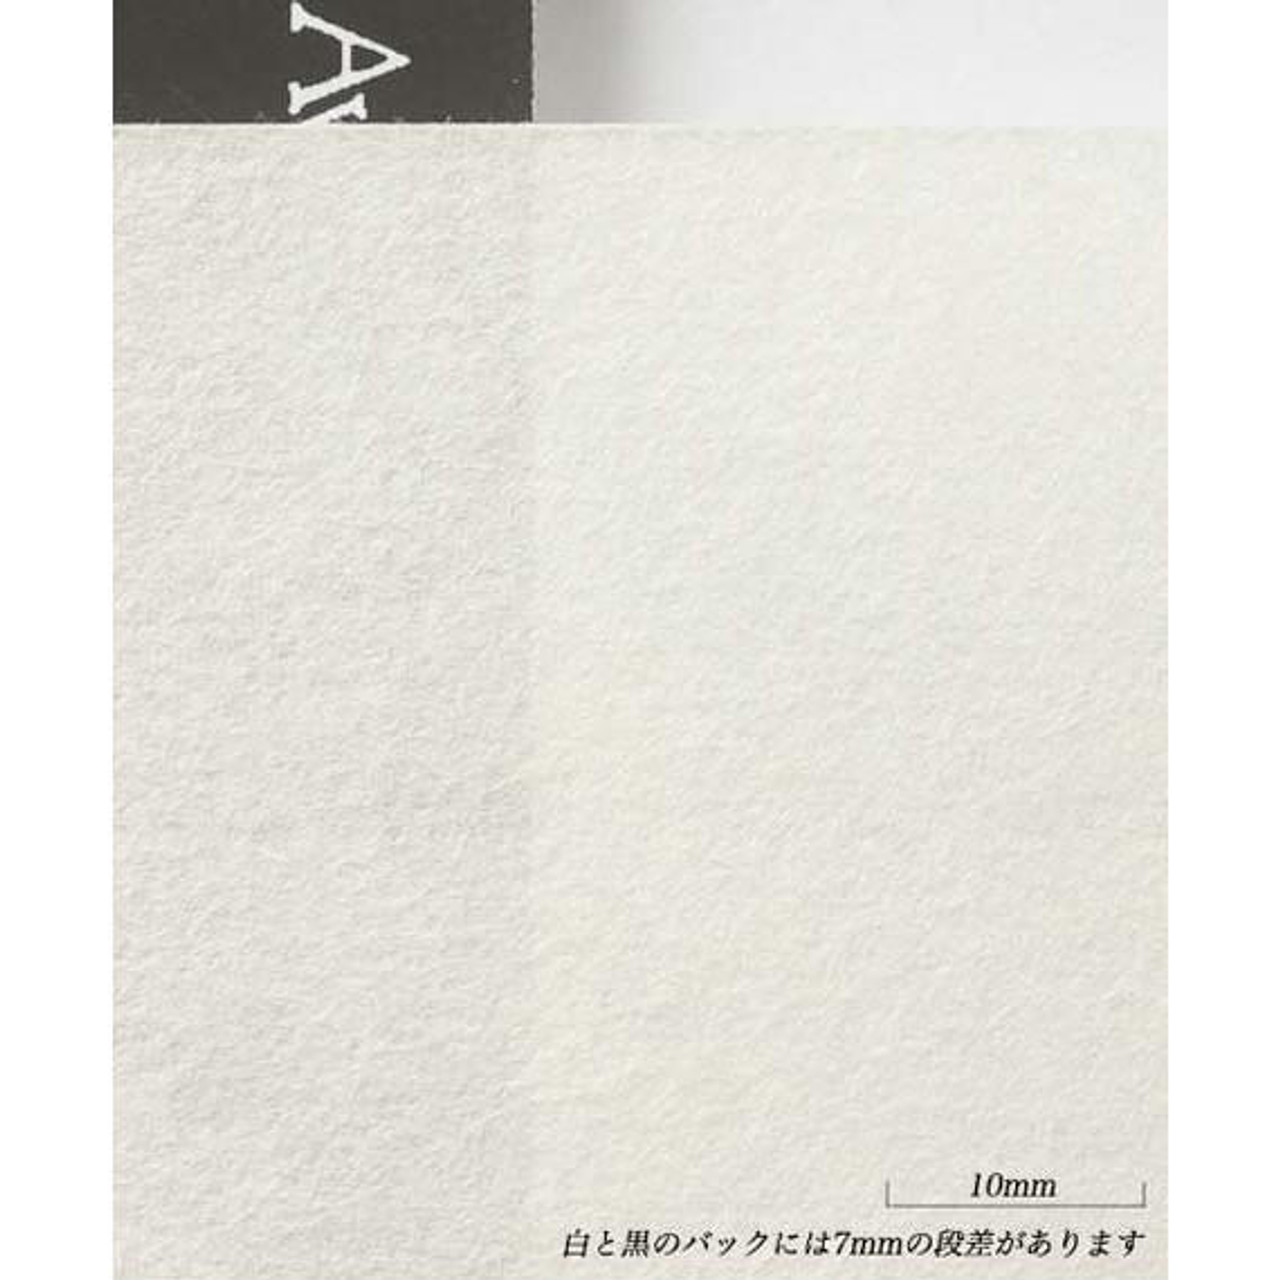 Awagami Mulberry Paper - Off White - 25 x 33